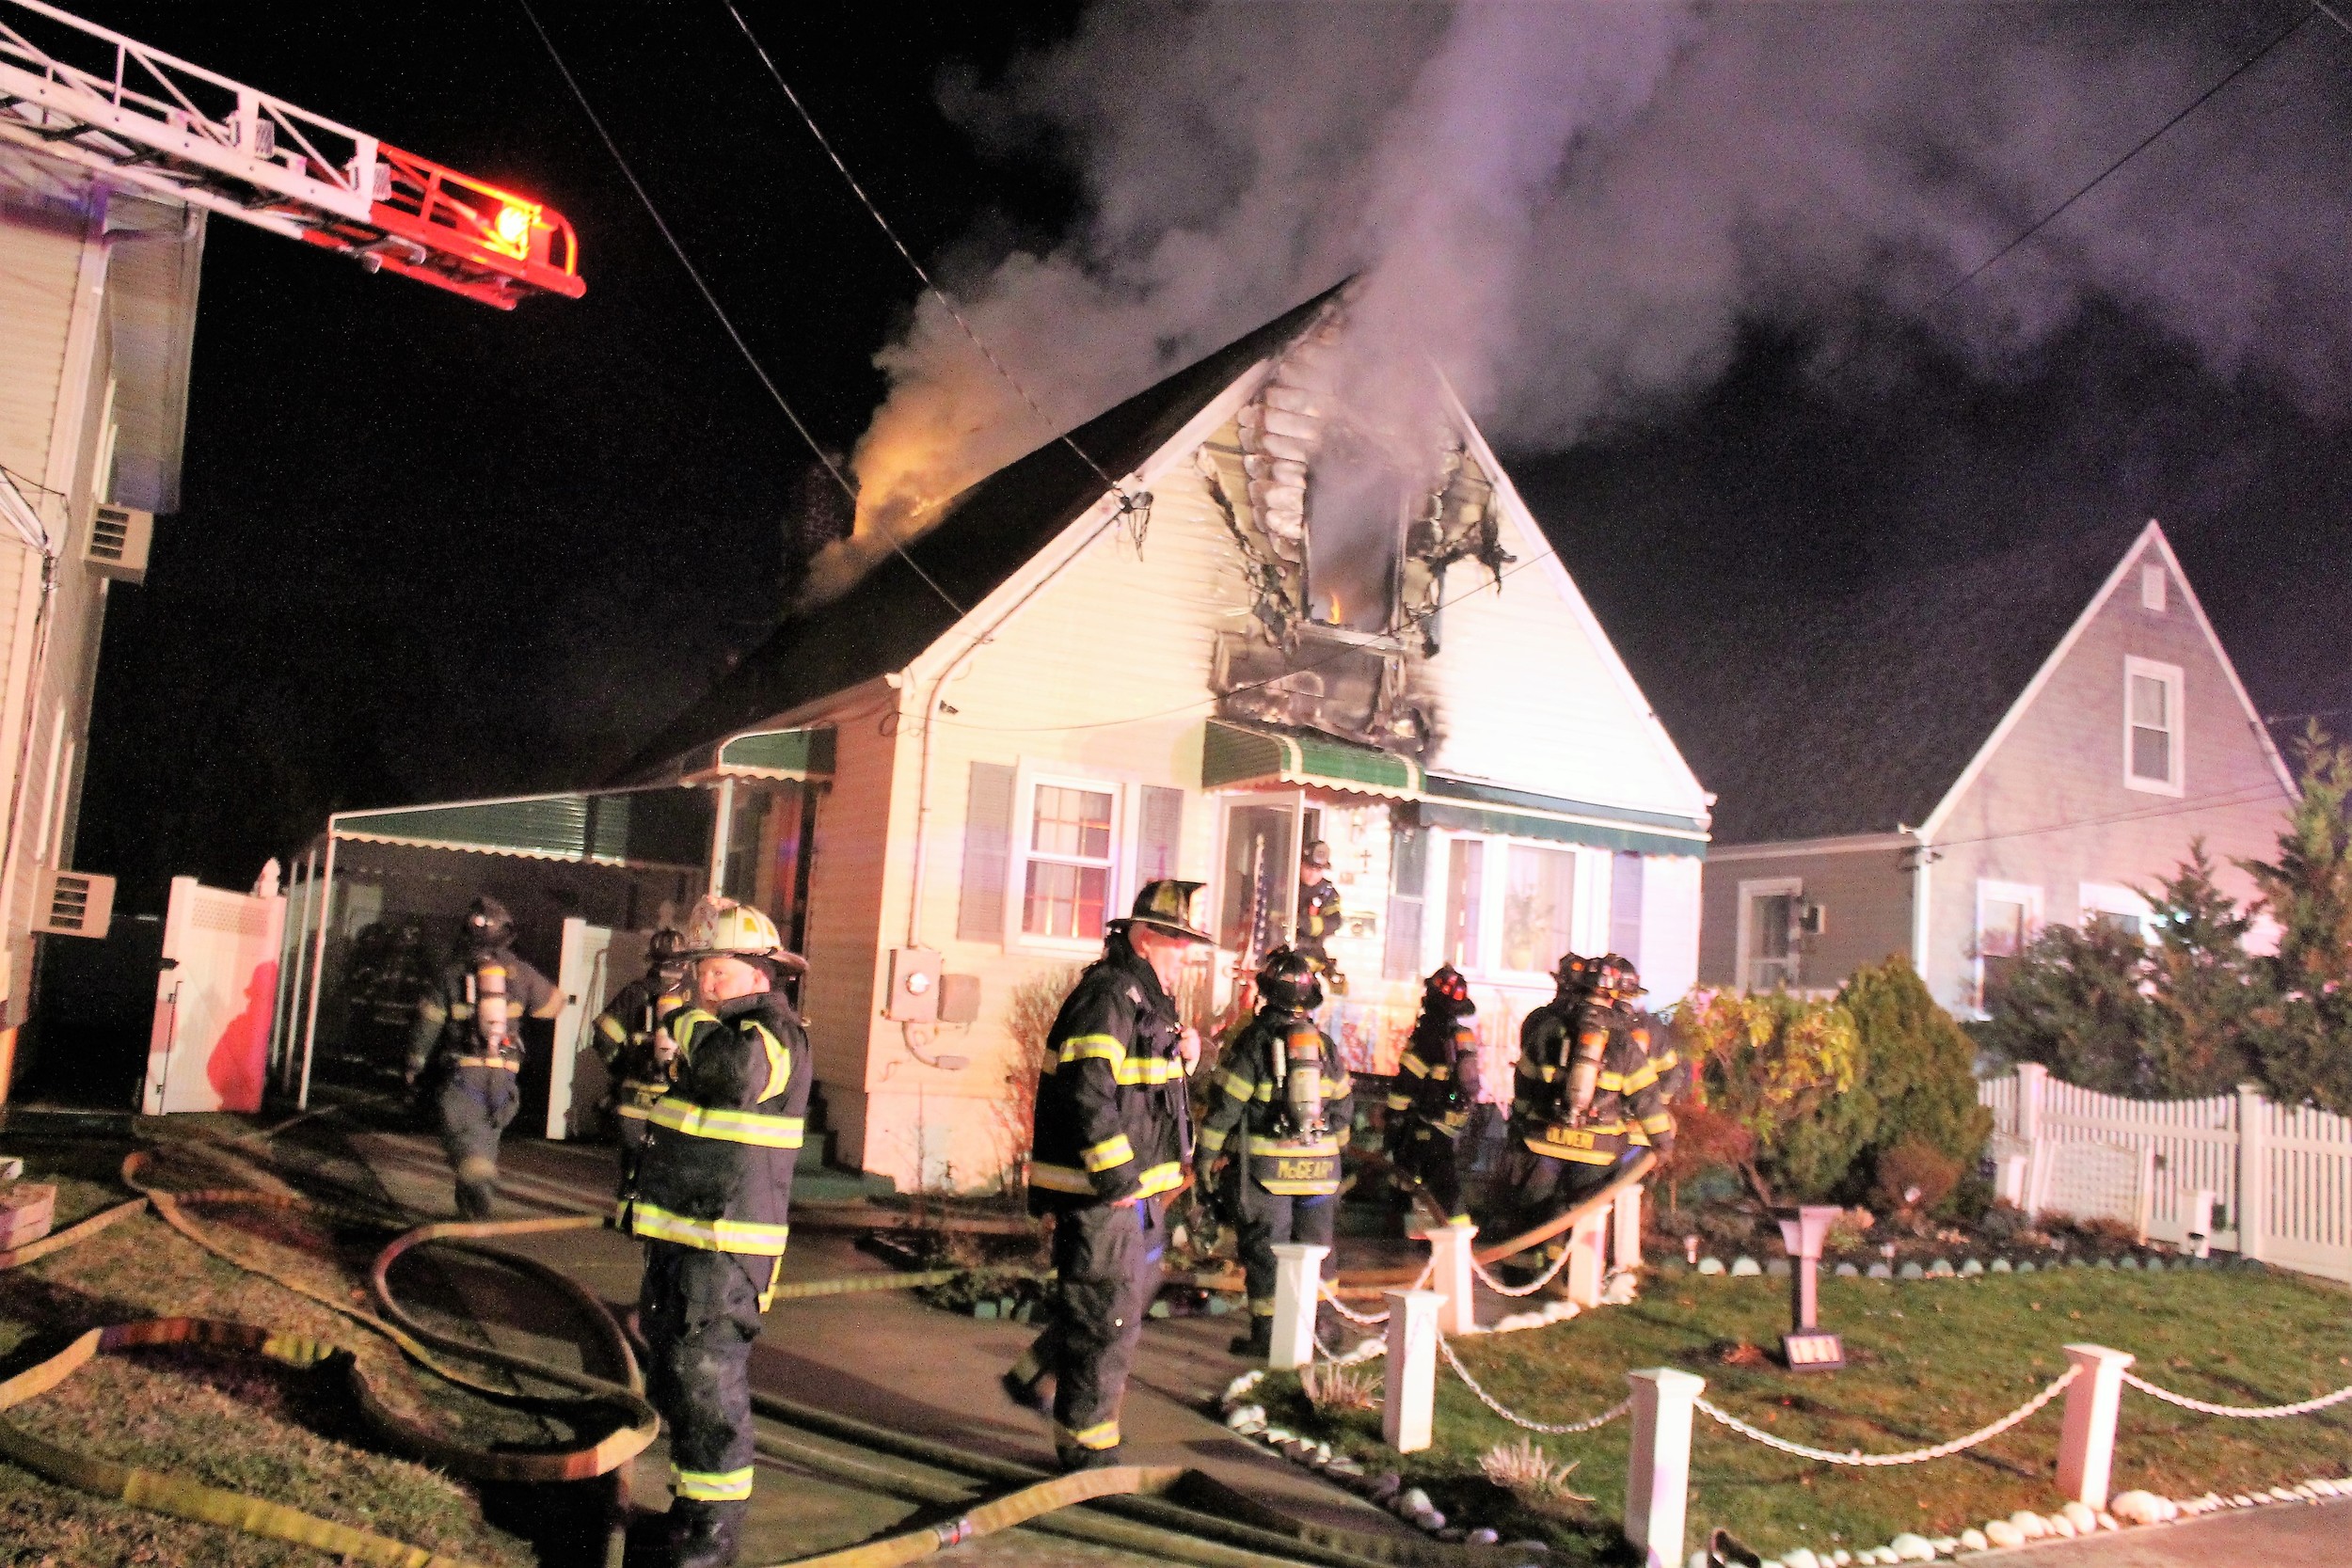 Firefighters tended to a blaze at a Fir Street home just after midnight on Feb. 24.